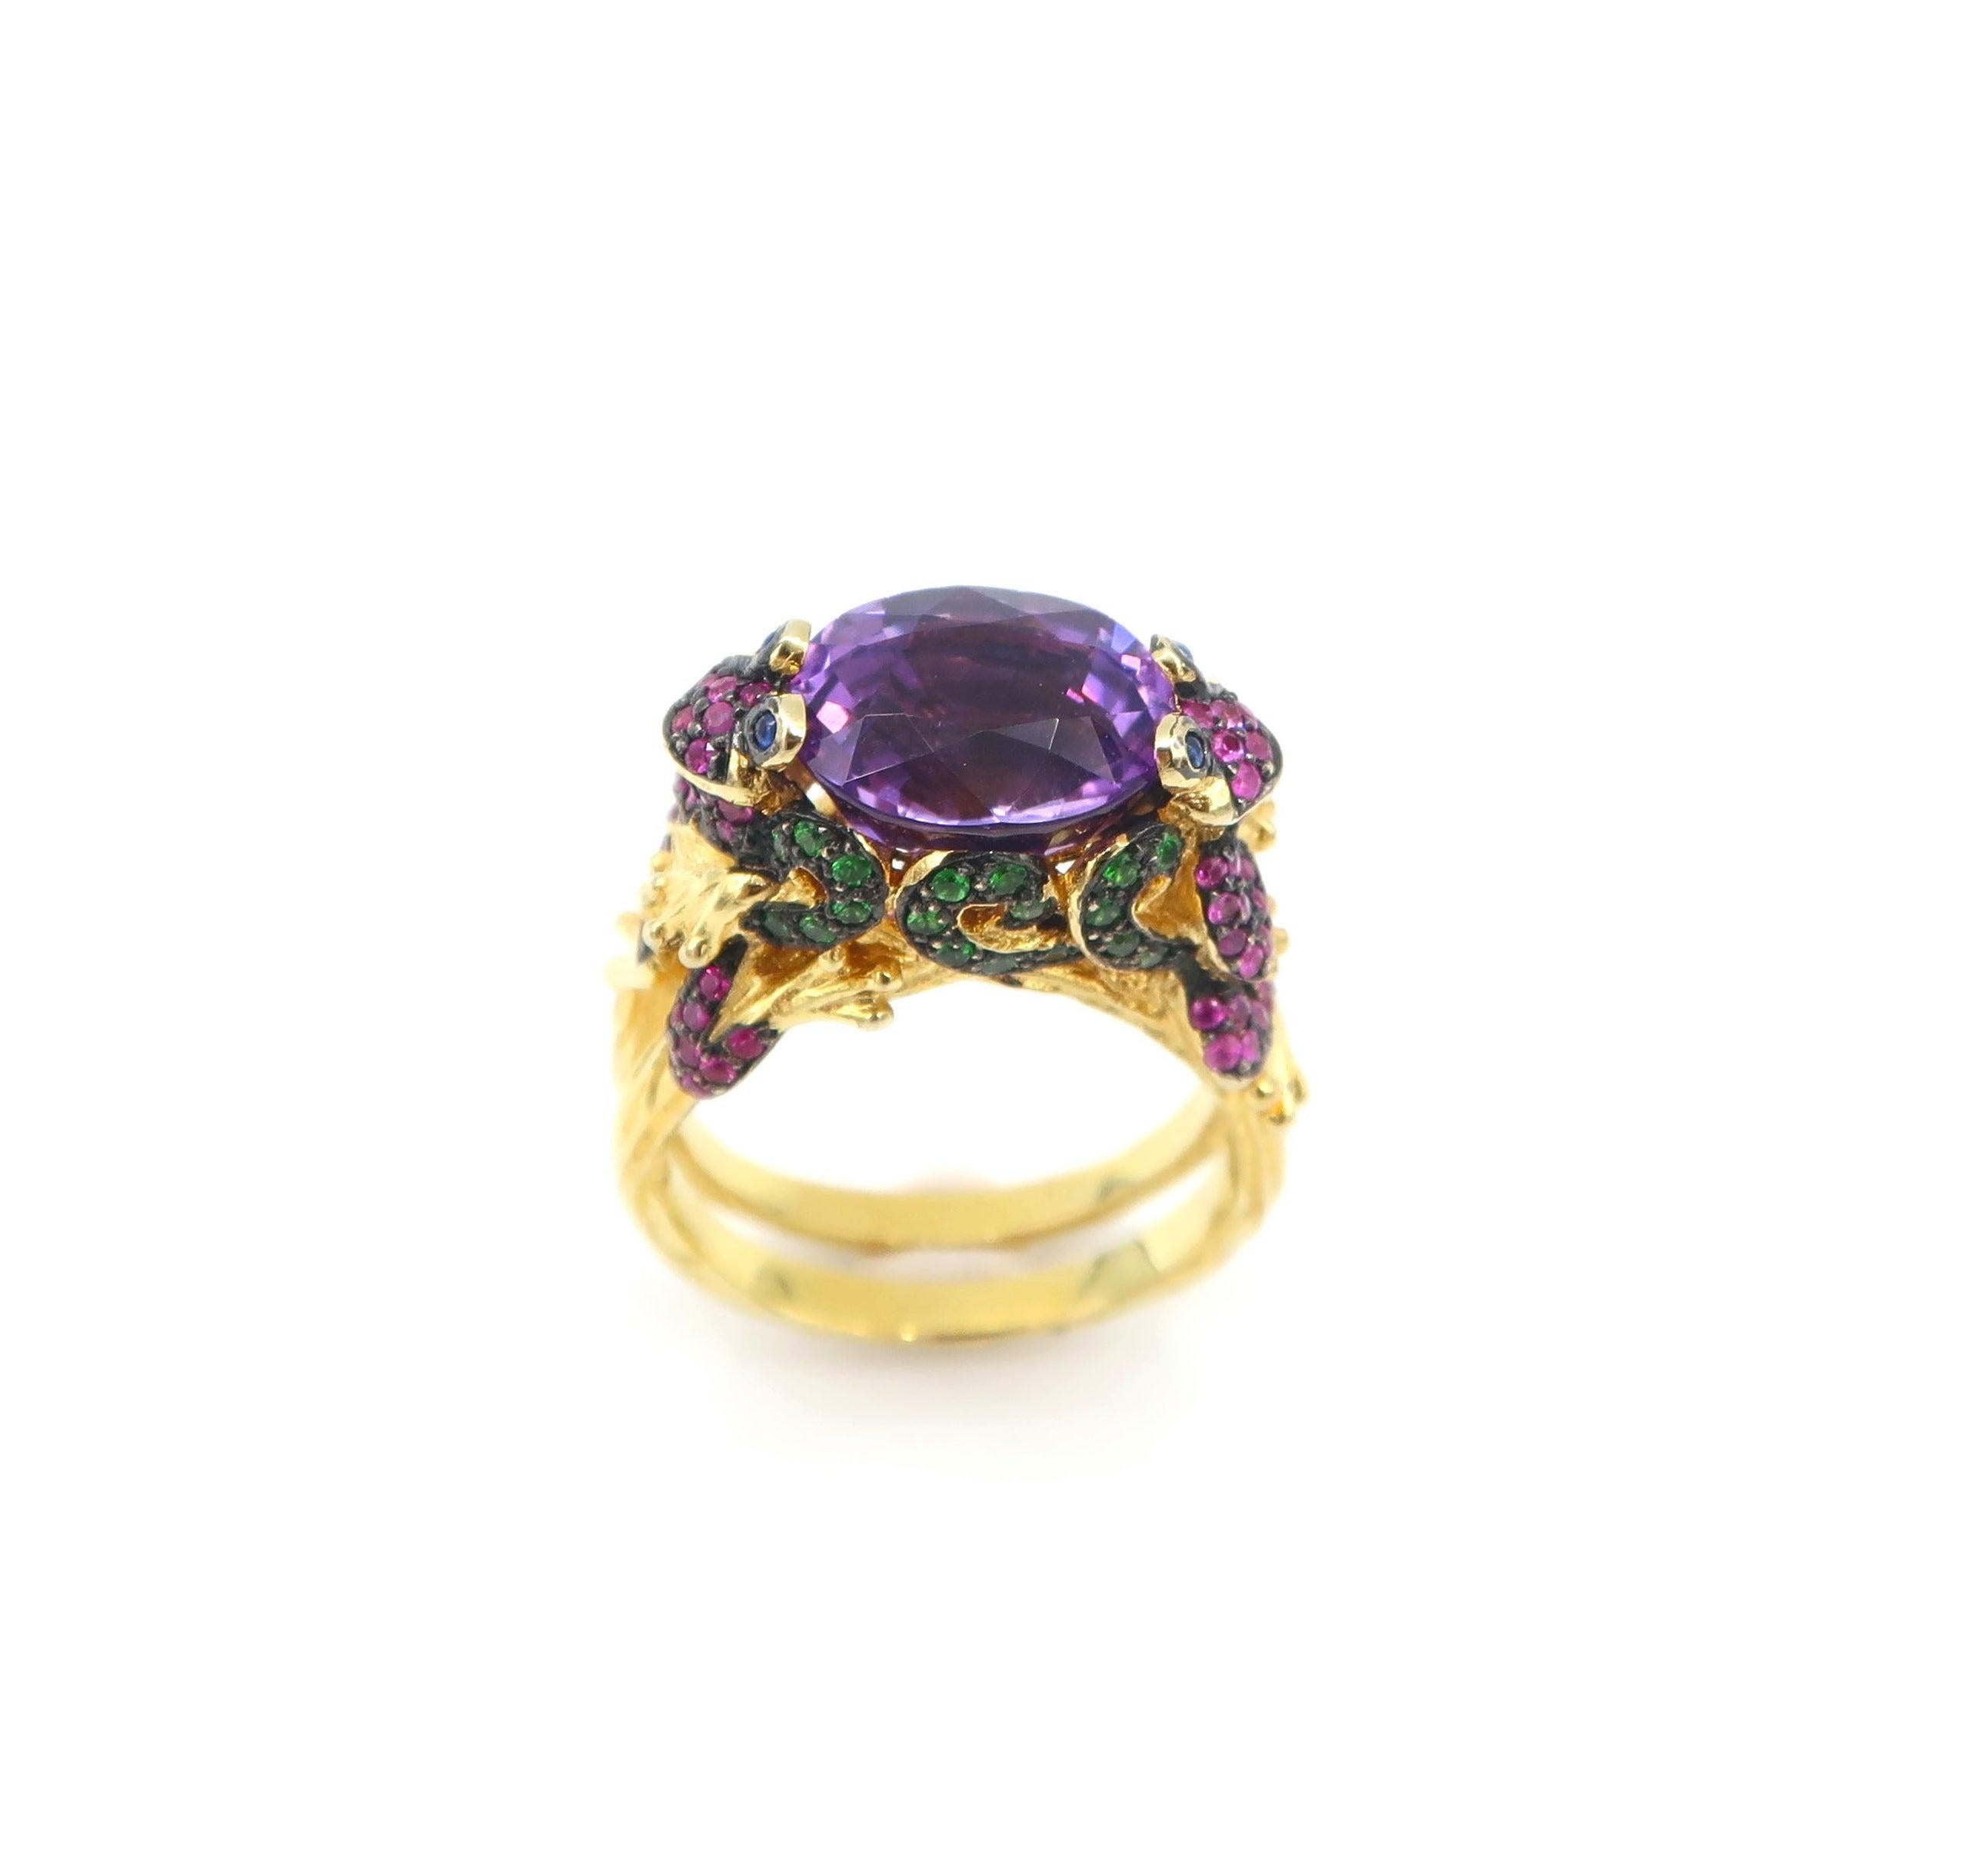 Frog Prince 7.10 Carat Amethyst embellished with Pink Sapphire and Tsavorite Cocktail Ring in 18K Yellow Gold

Complimentary resizing service for this ring is available. Please kindly let us know upon check-out.

Size: US 9.5 / 61

Amethyst: 7.10